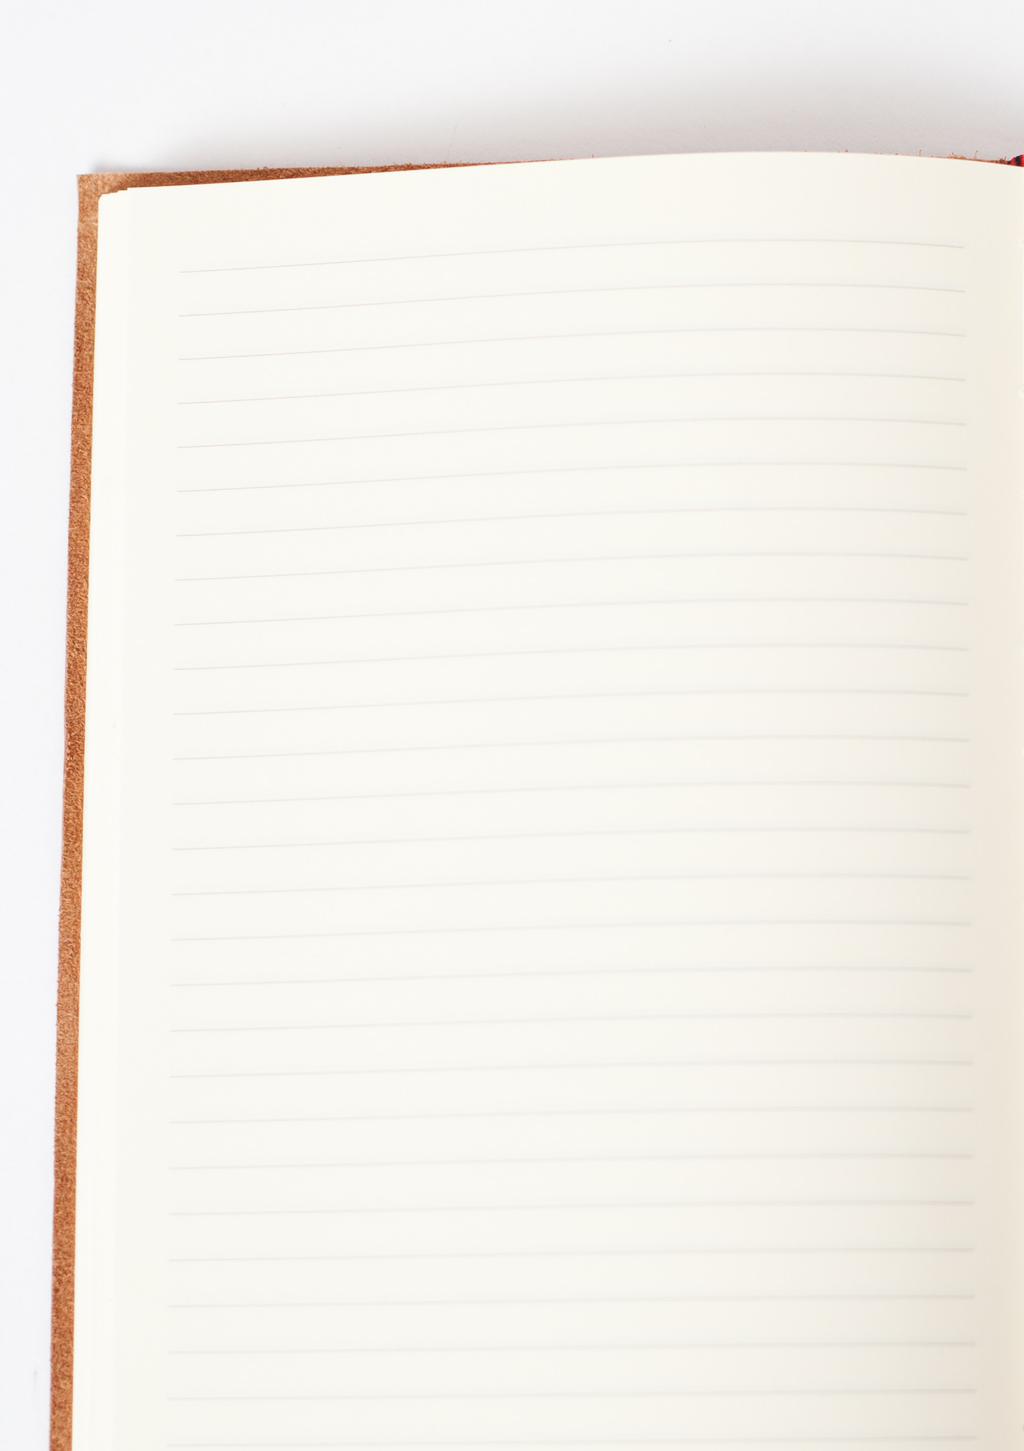 Make use of these blank pages at the end of each section if